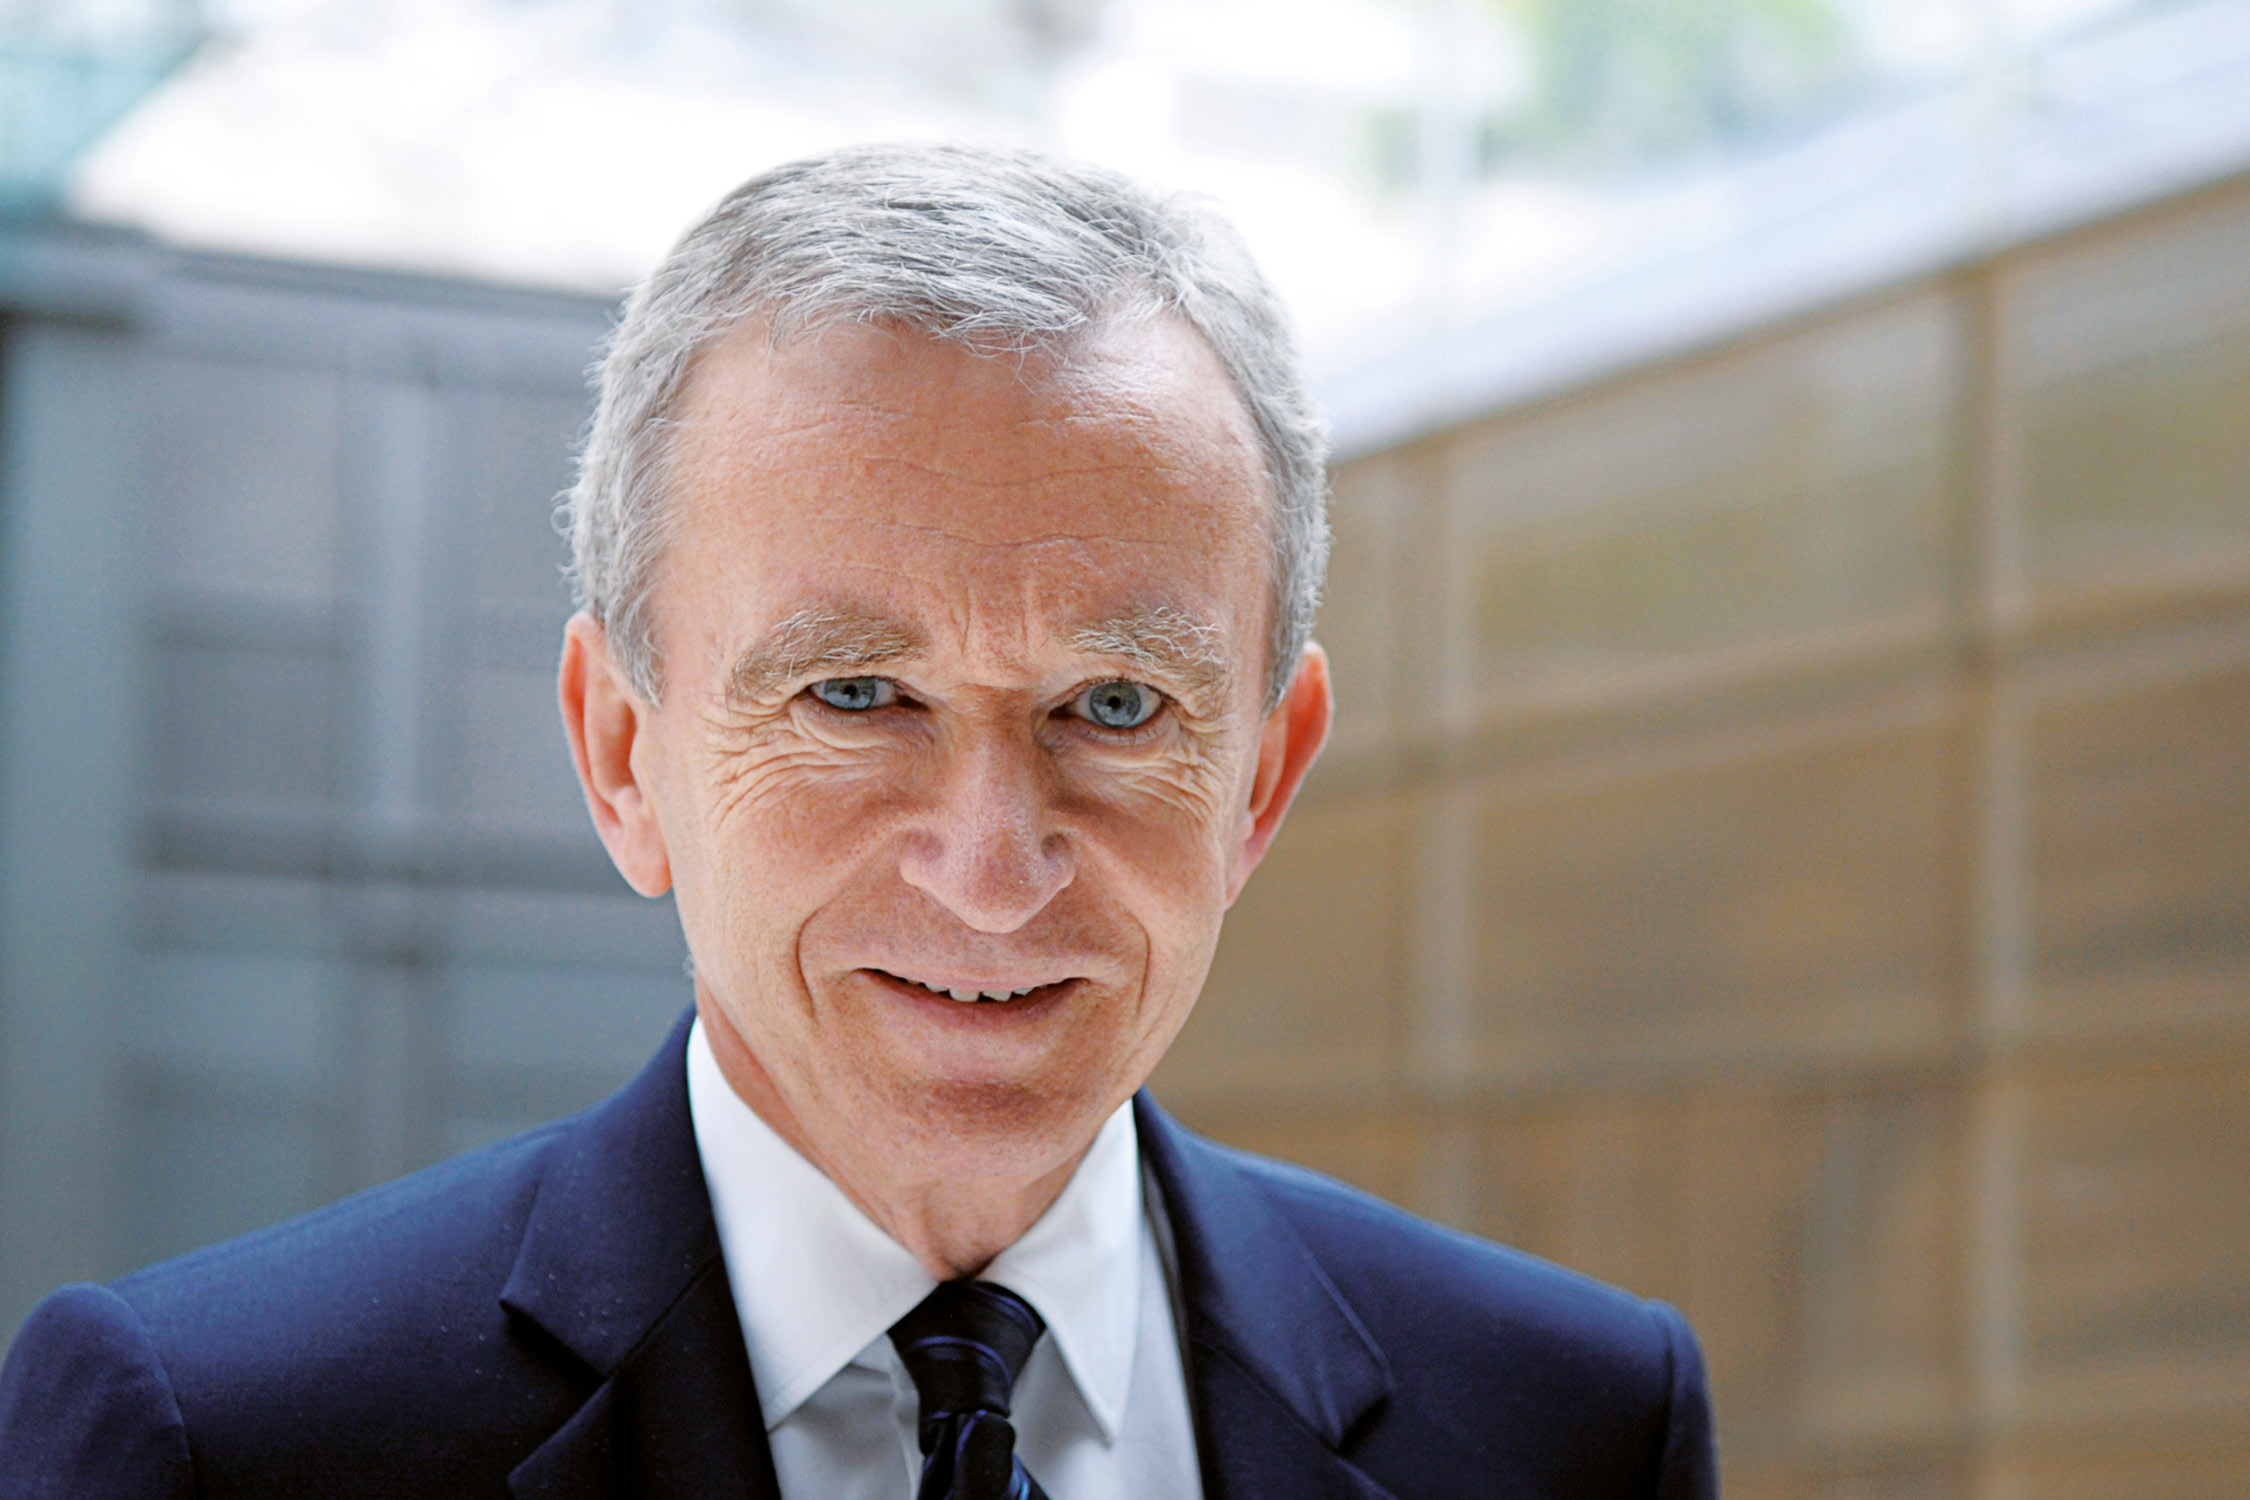 Bernard Arnault Net Worth and the Life and Legacy of the LVMH Chairman